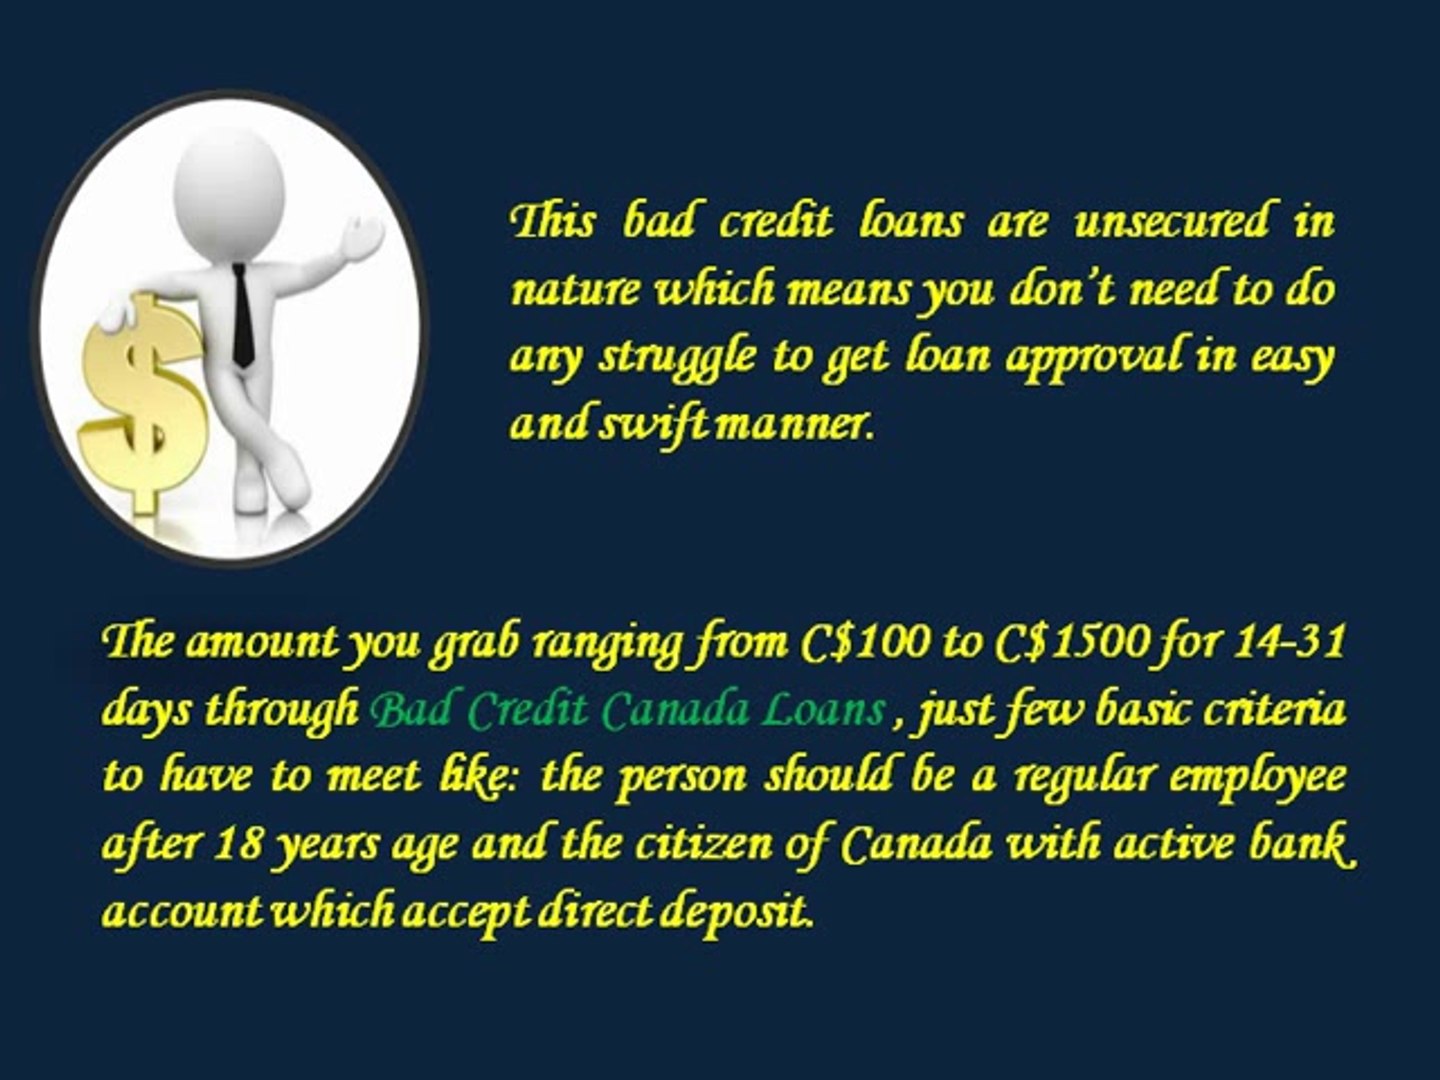 Bad Credit Payday Loans- Bad Credit Loans Swiftly to Deal with Pressing Expenses